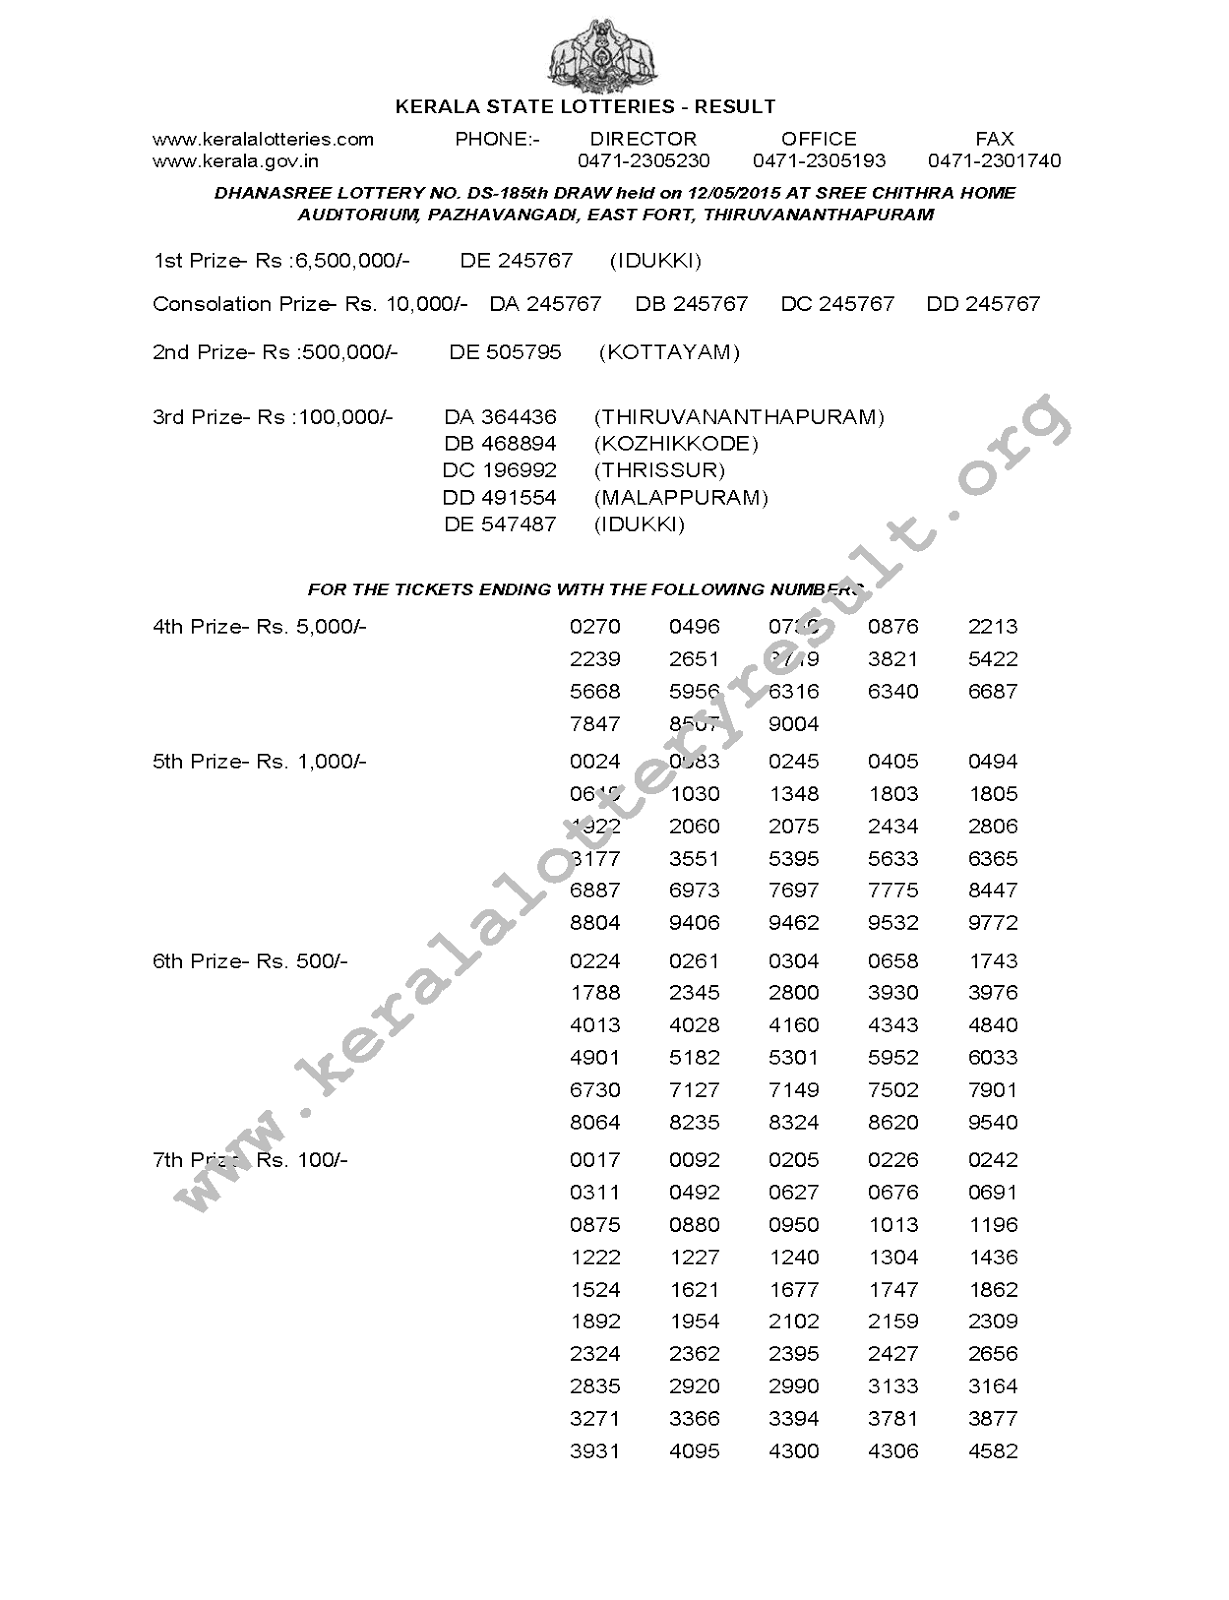 DHANASREE Lottery DS 185 Result 12-5-2015